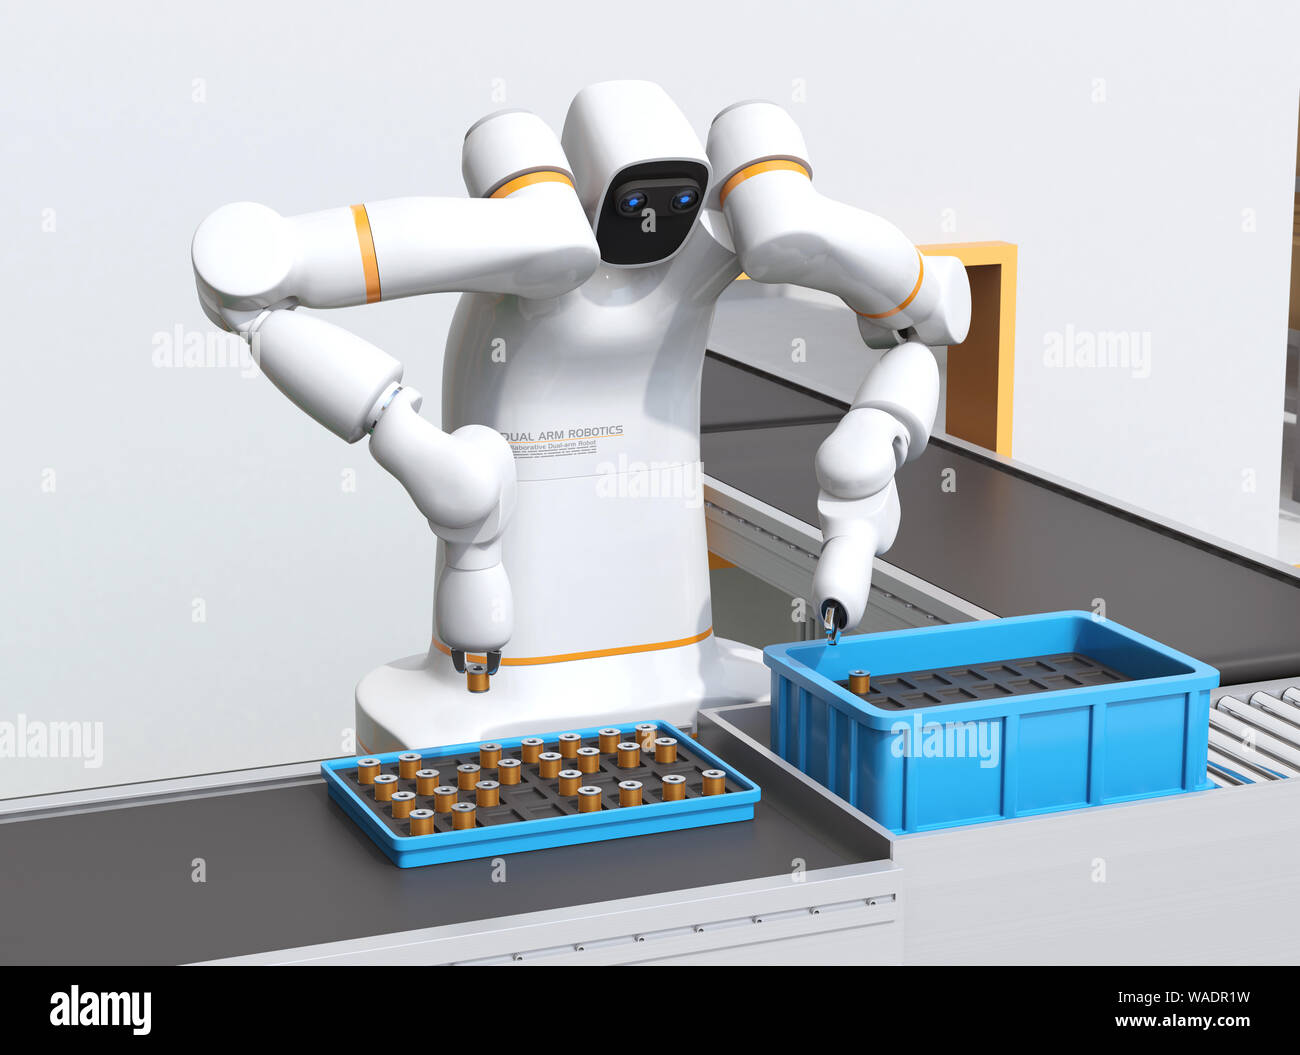 Dual-arm robot assembly motor coils in cell-production space. Collaborative robot concept. design. 3D rendering image Stock Photo - Alamy